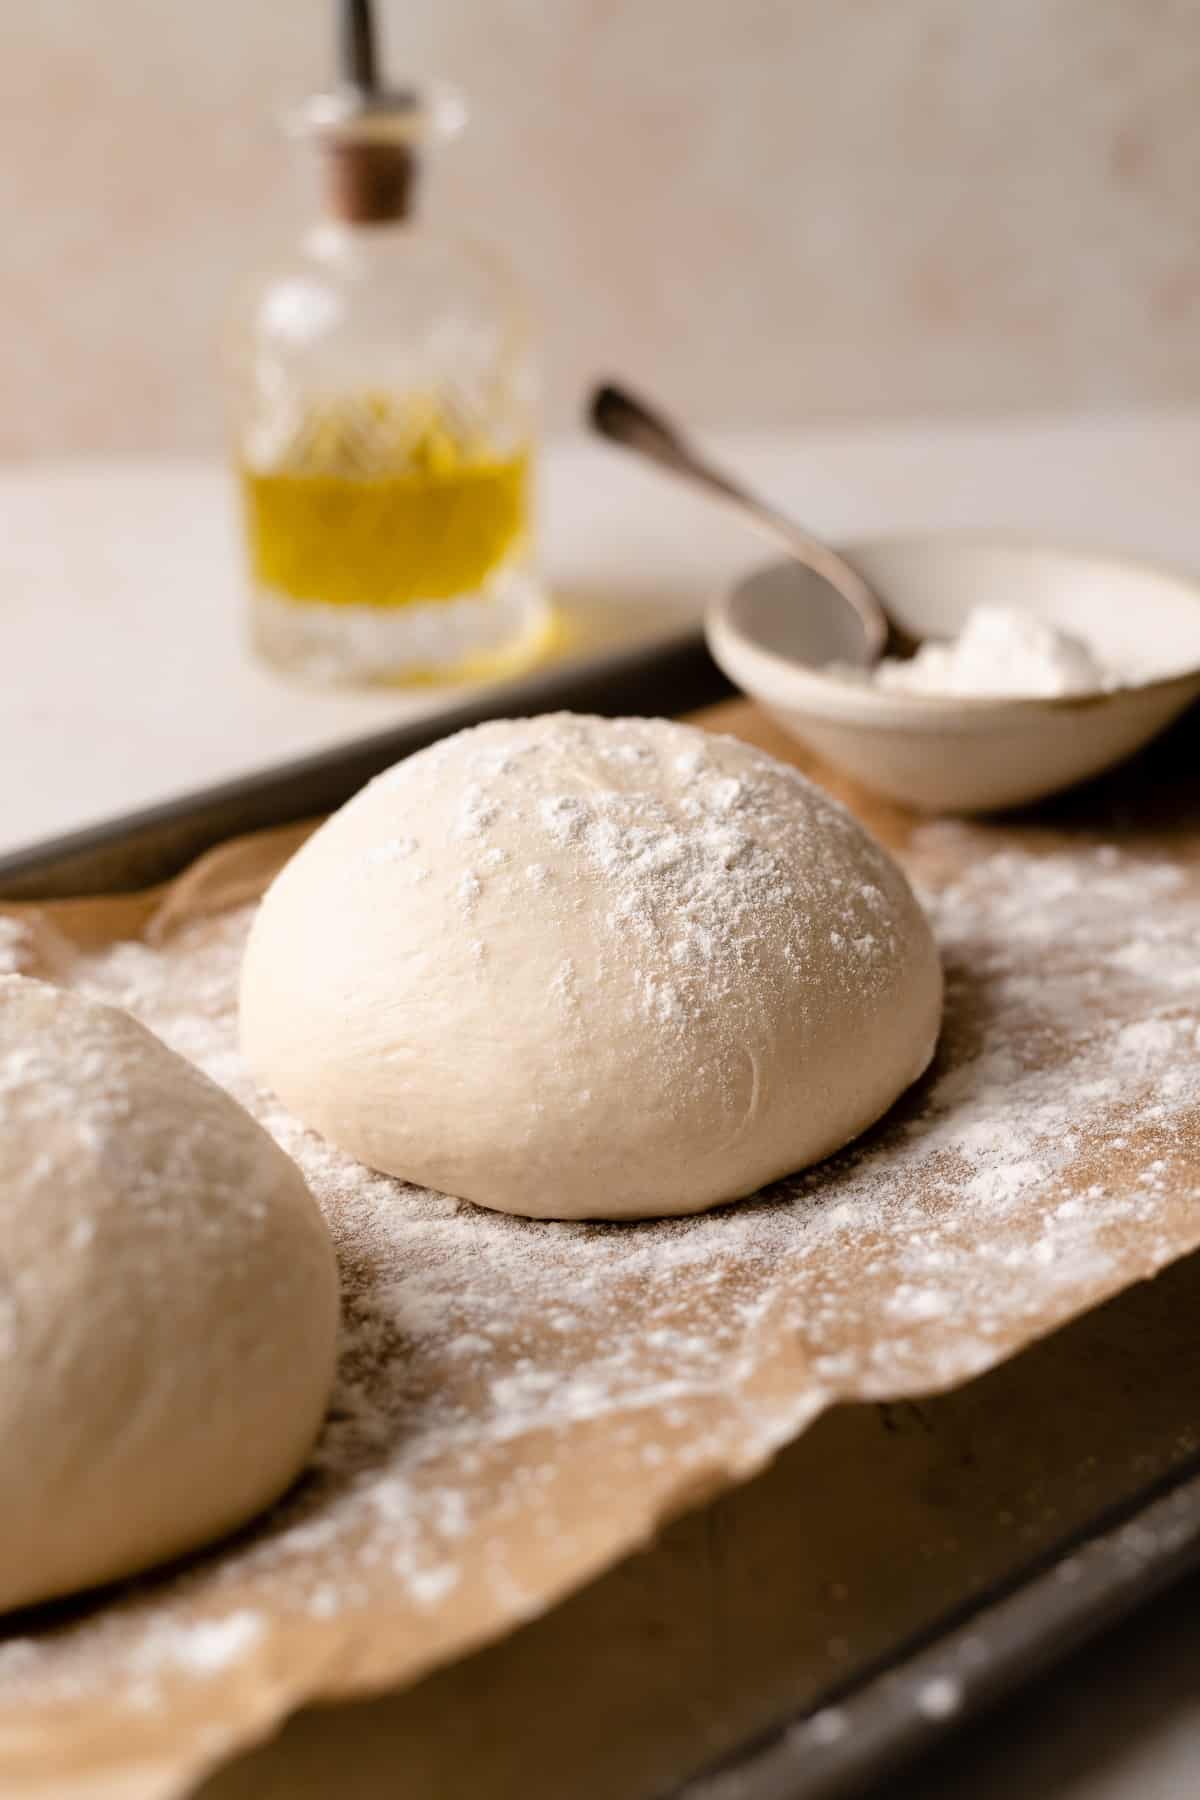 two balls of homemade pizza dough on a baking tray dusted with flour.